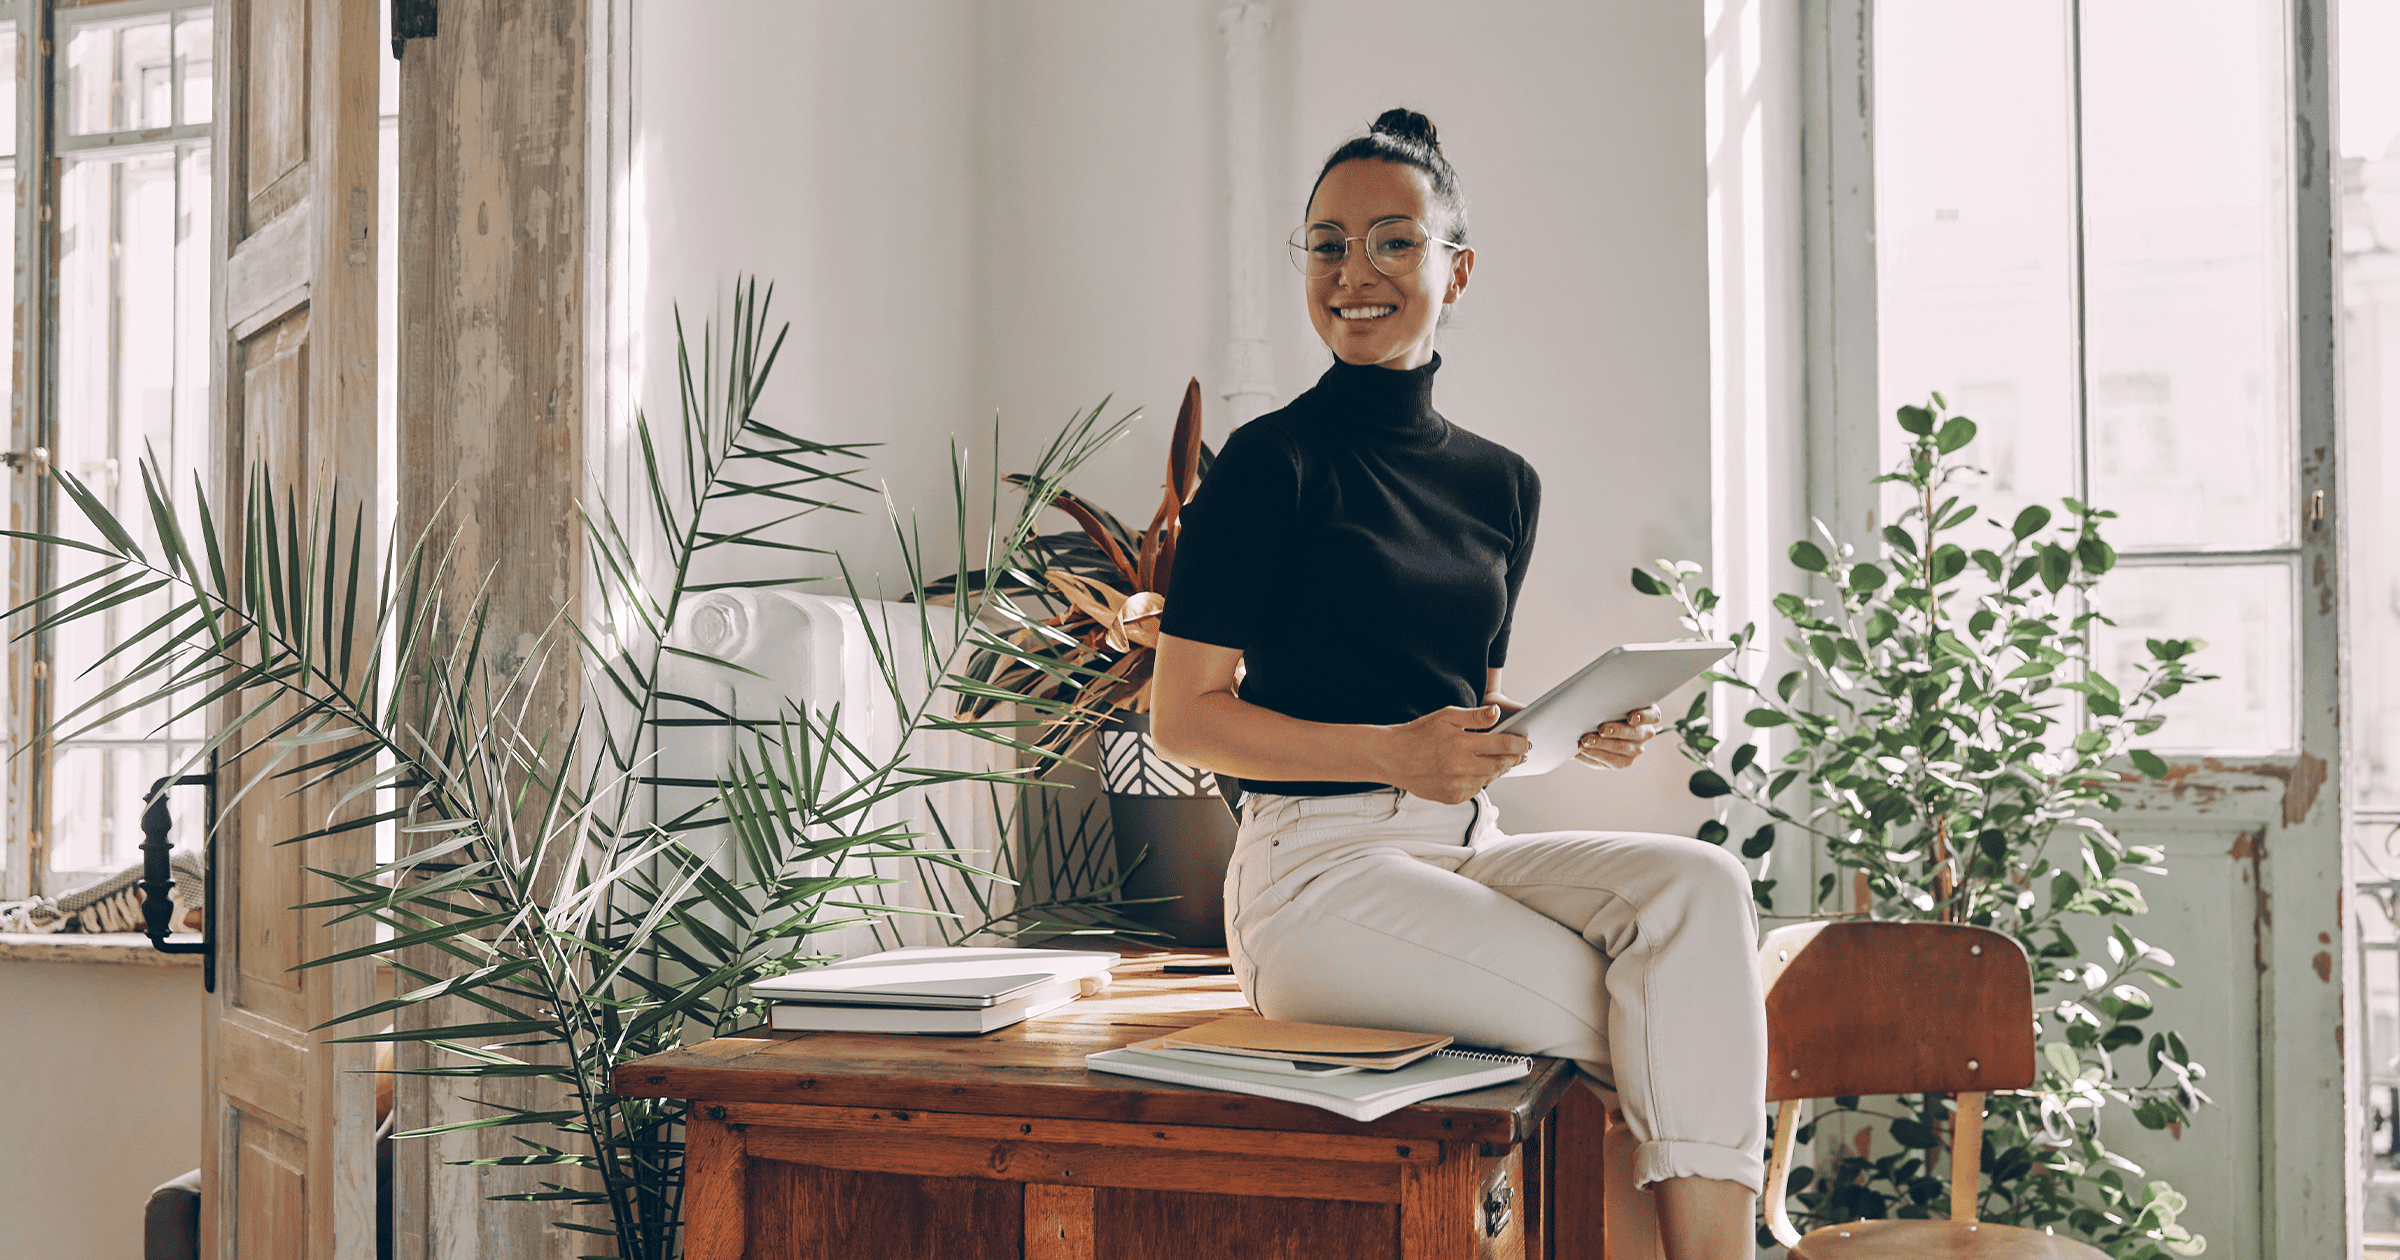 A woman sits on a desk smiling broadly surrounded by plants in an office flooded with sunlight